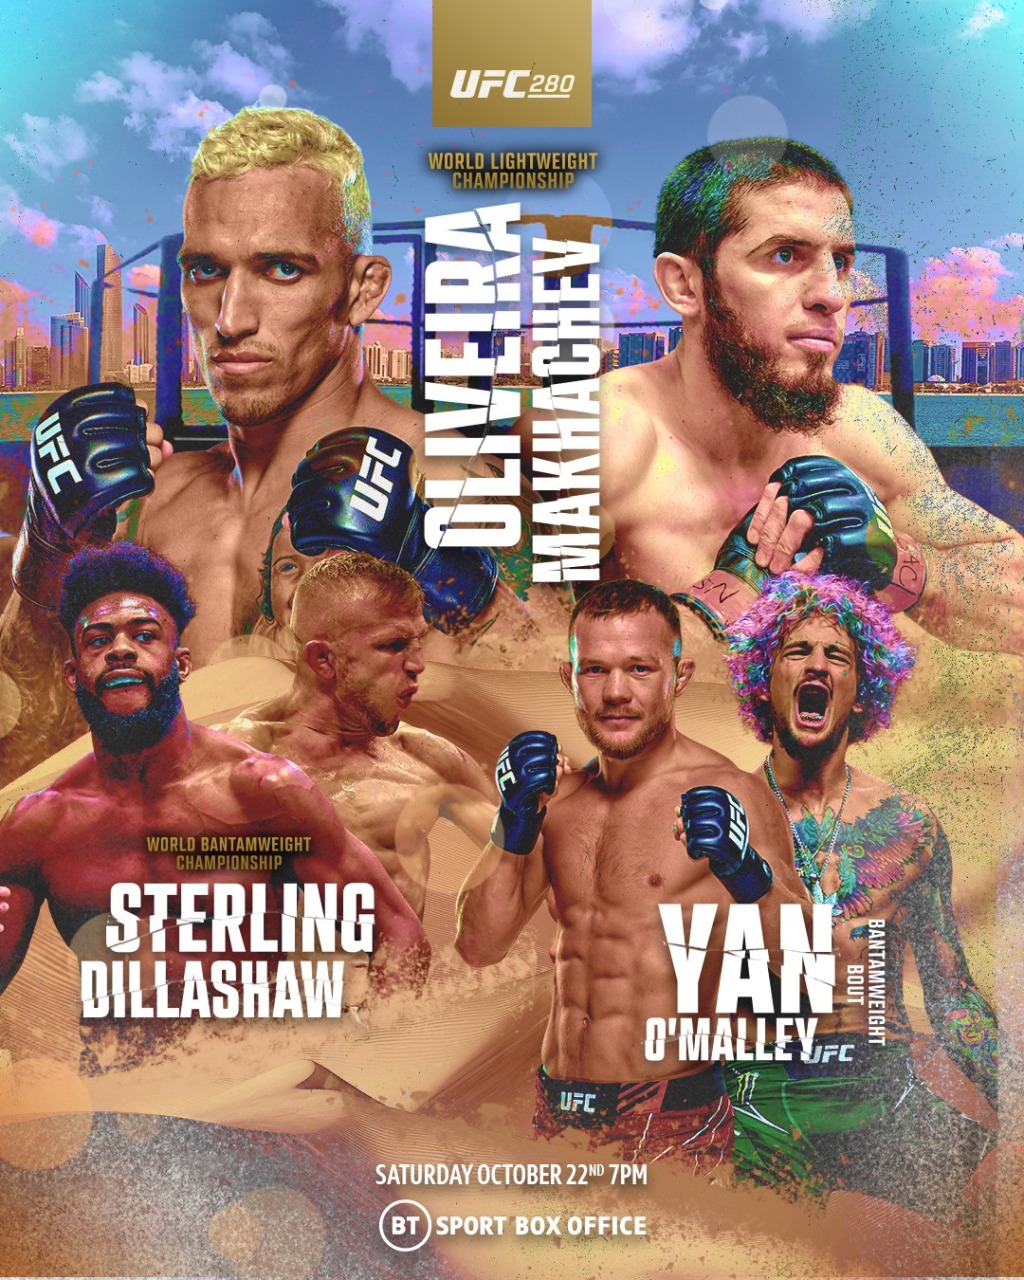 UFC Fight Poster